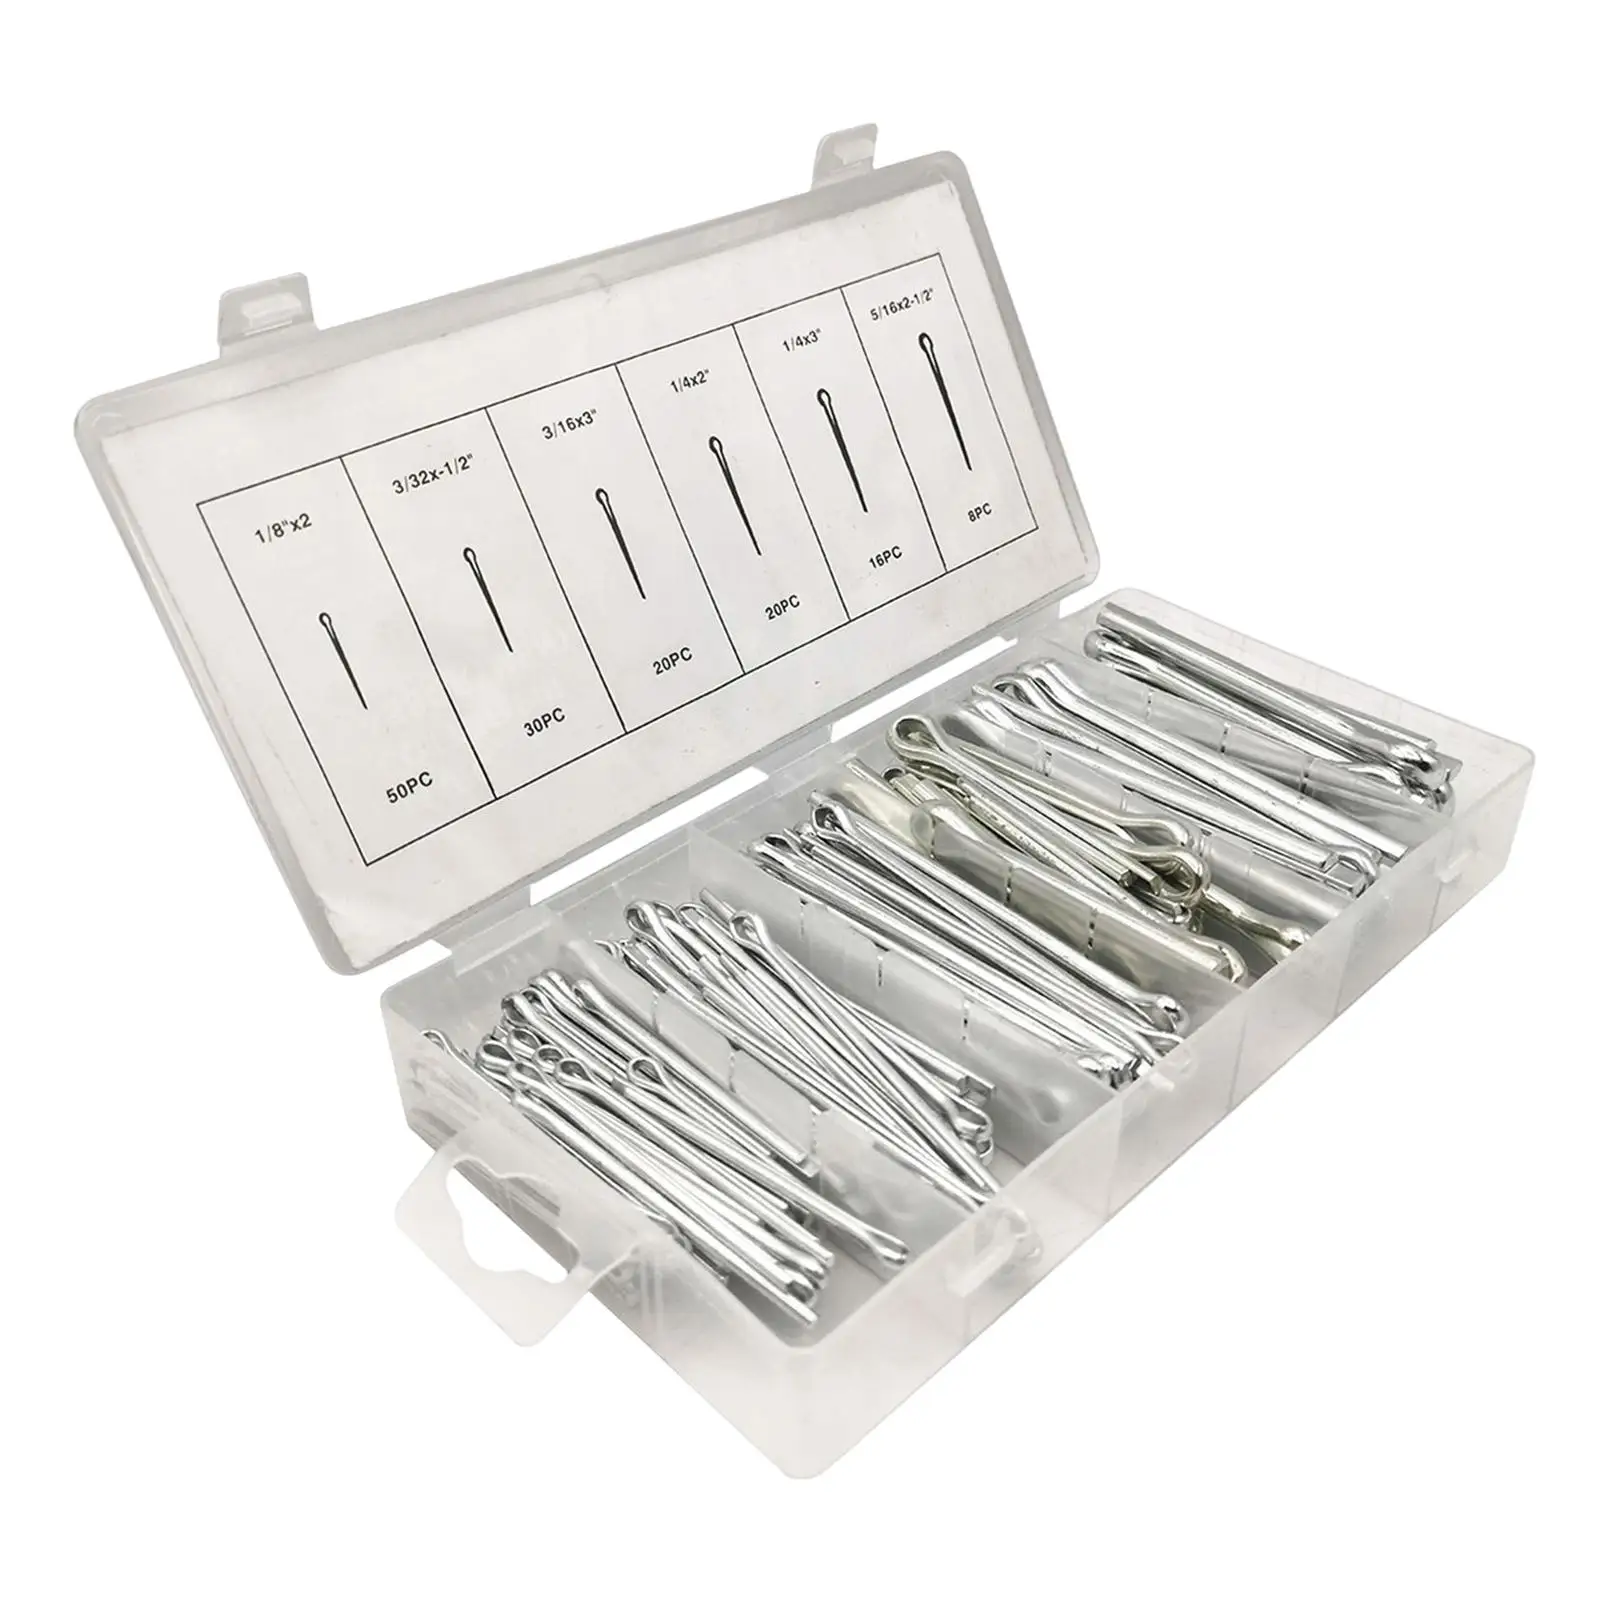 144x Assorted Split Cotter Pins Heavy Duty Fasteners Fixings assortment Premium Quality Holds Pins or Castle Nuts in Place